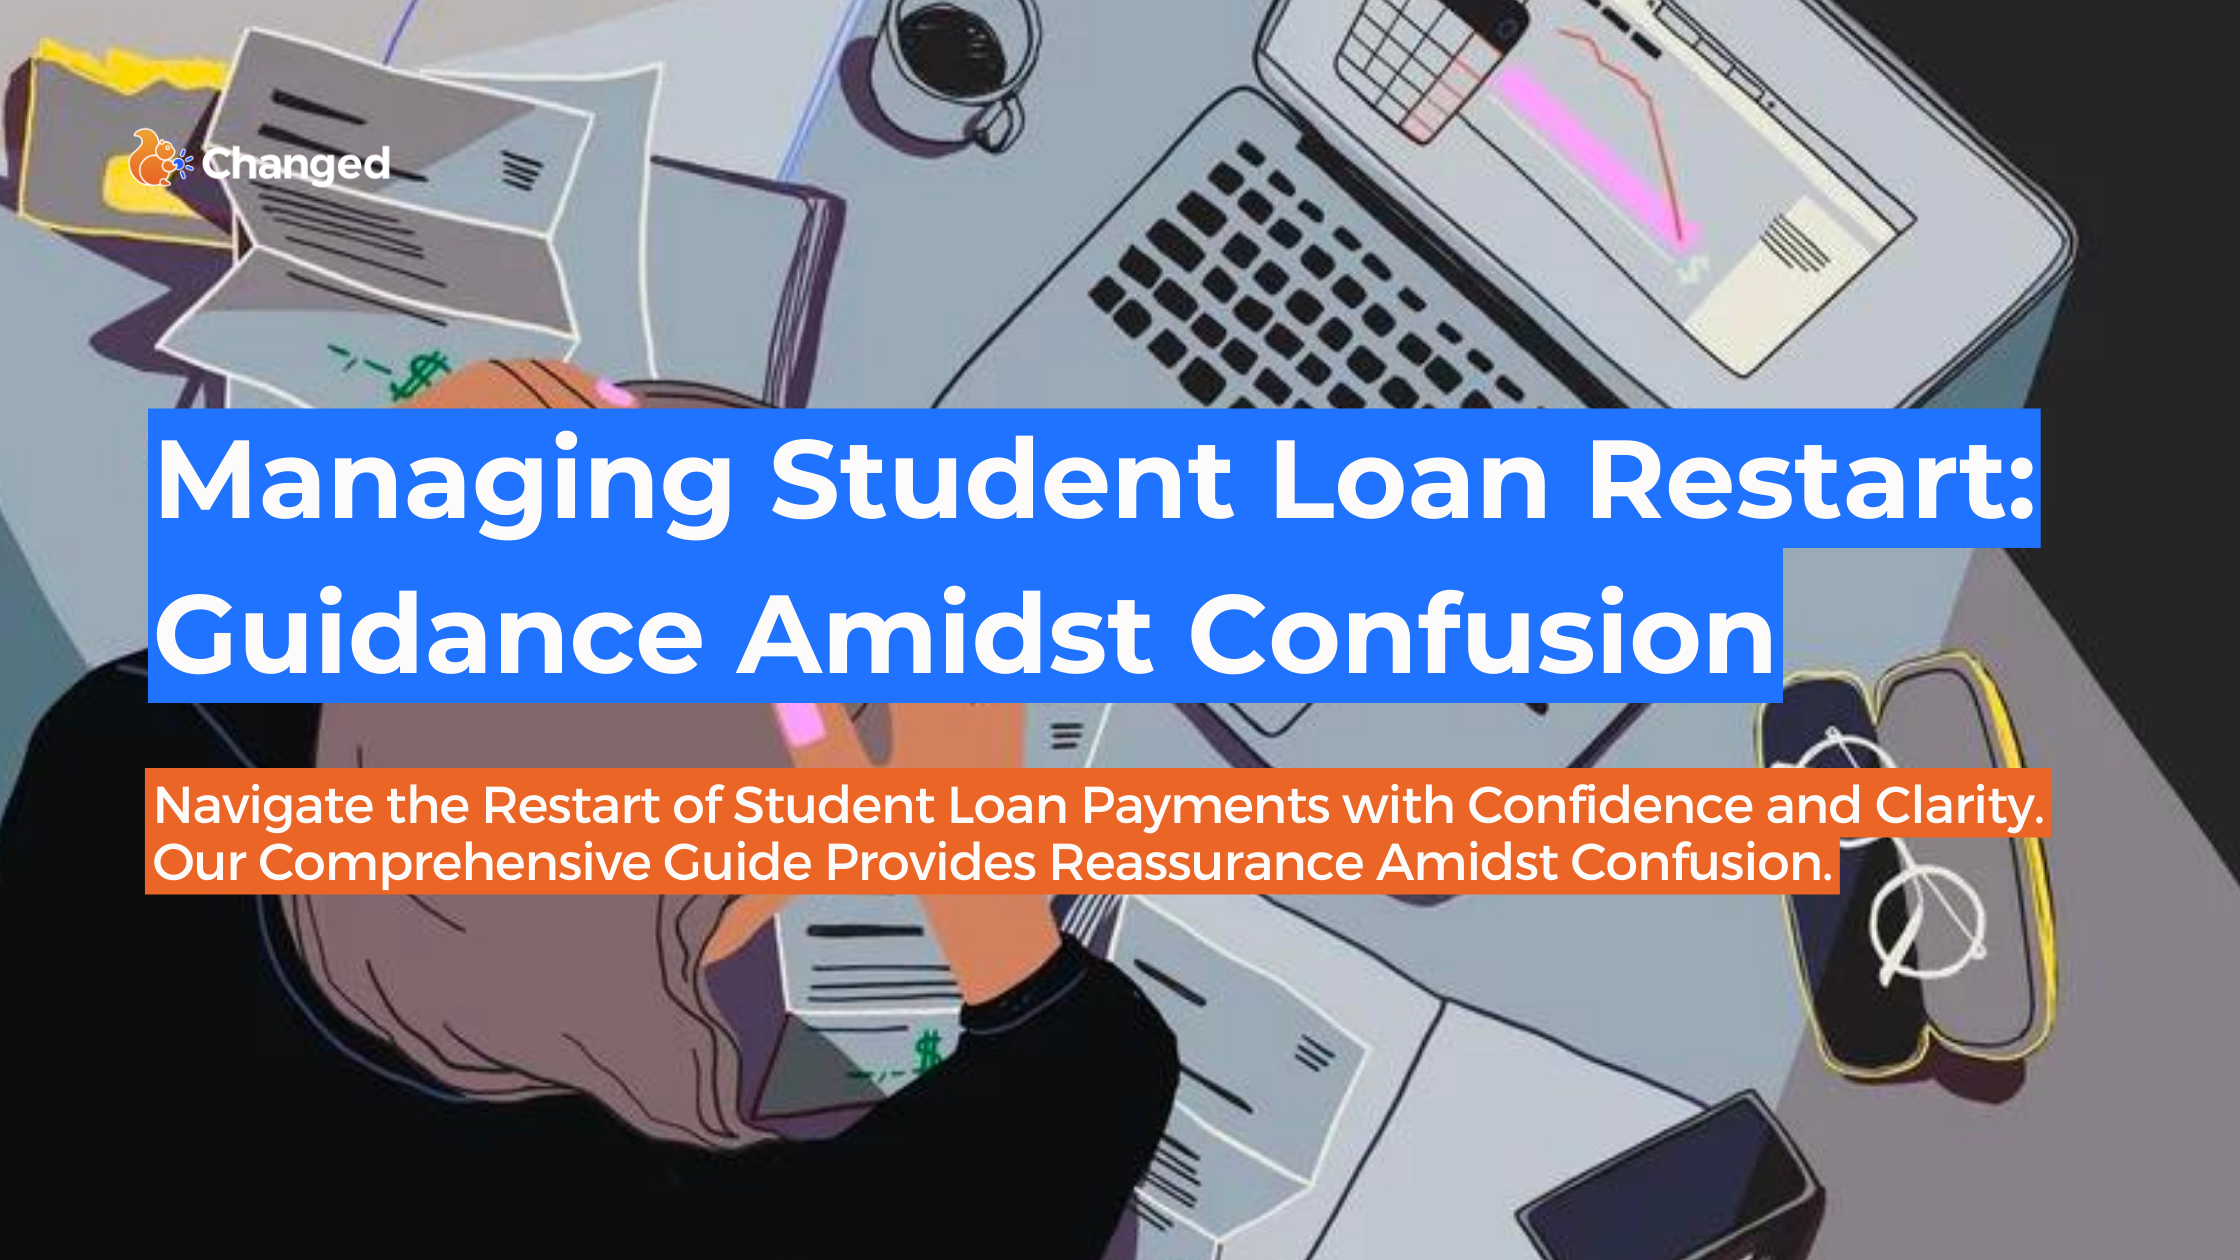 Managing Student Loan Restart: Guidance Amidst Confusion